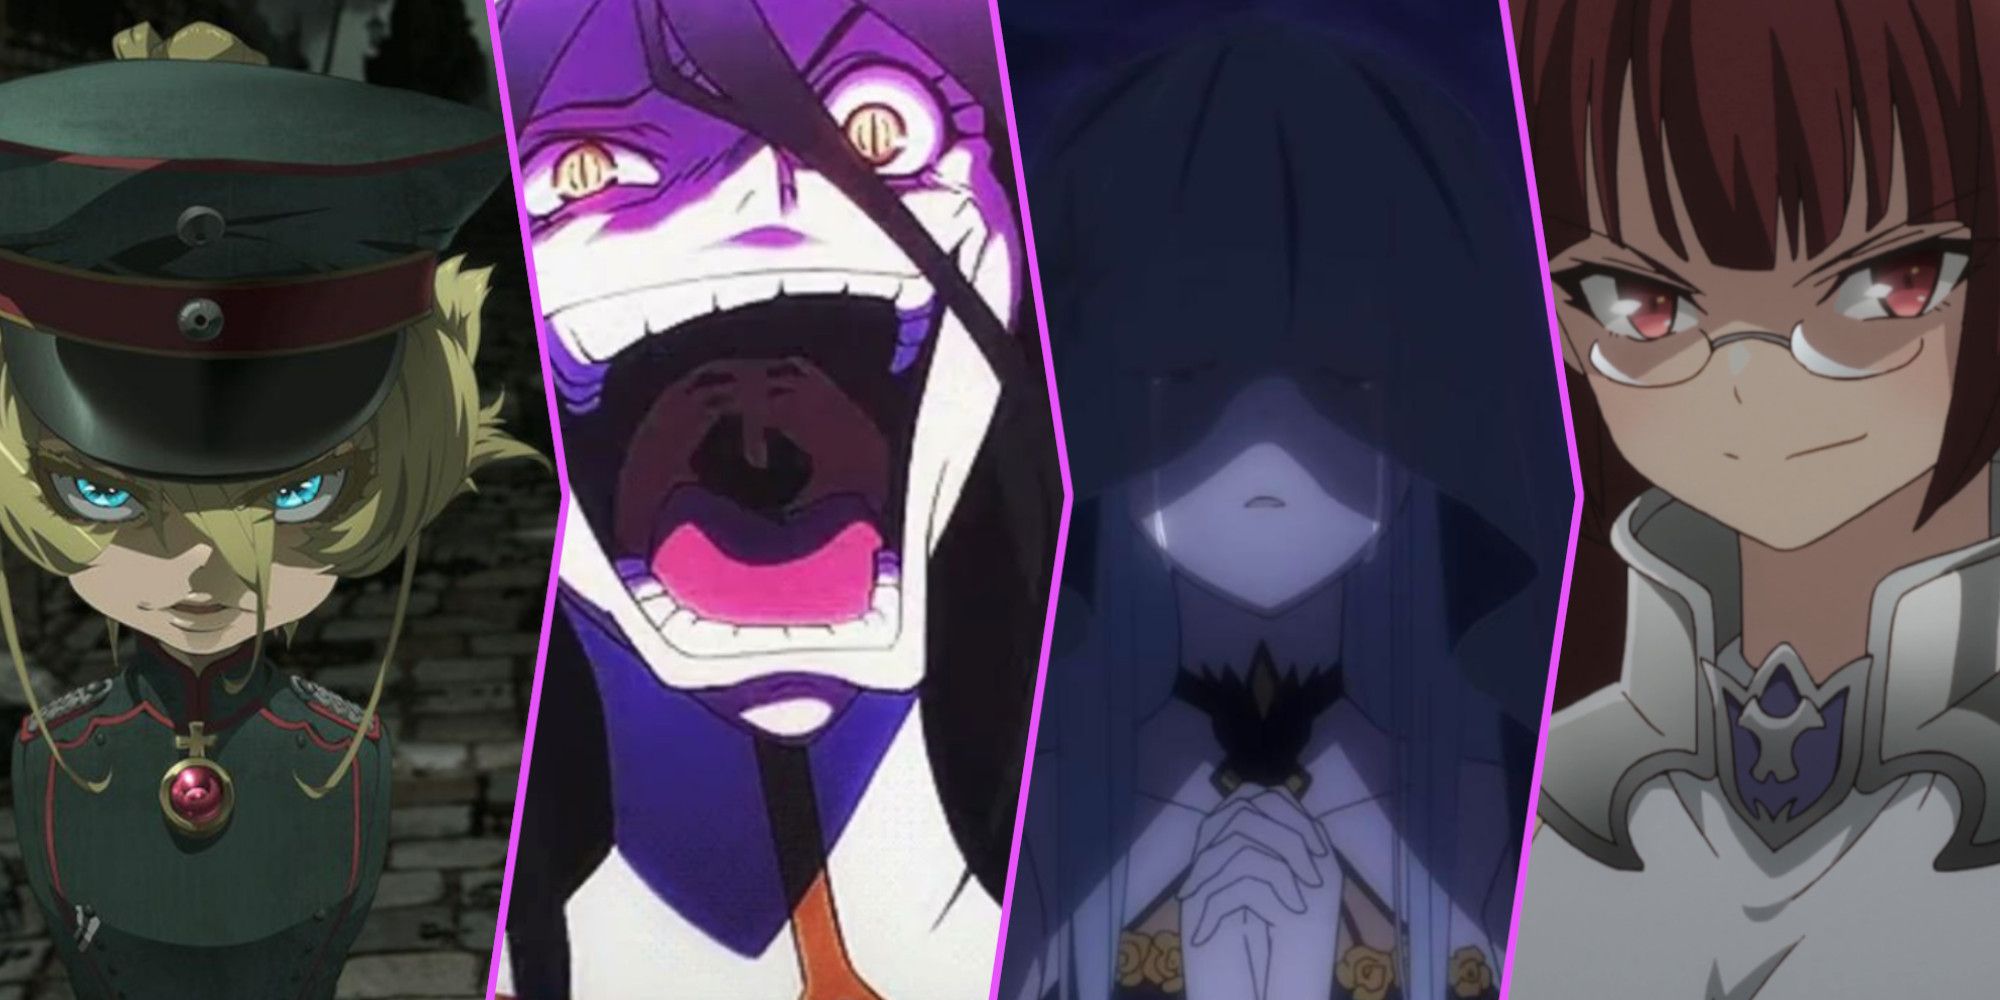 Here's the Anime Villain You'd Be, Based On Your Myers-Briggs® Personality  Type - Psychology Junkie